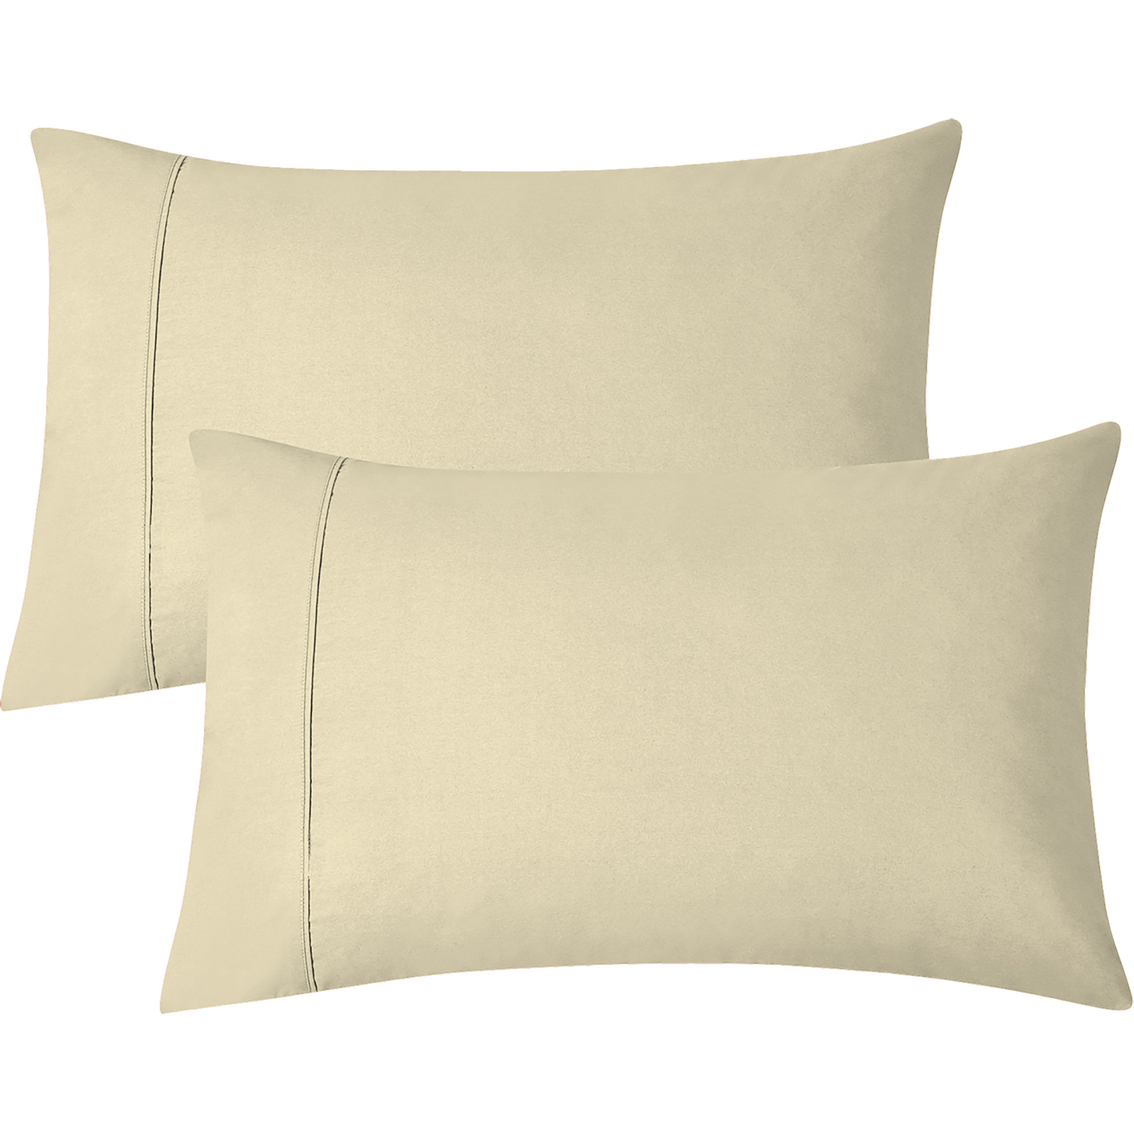 Aireolux 1000 Thread Count Egyptian Cotton Sateen Pillowcases - Image 3 of 6